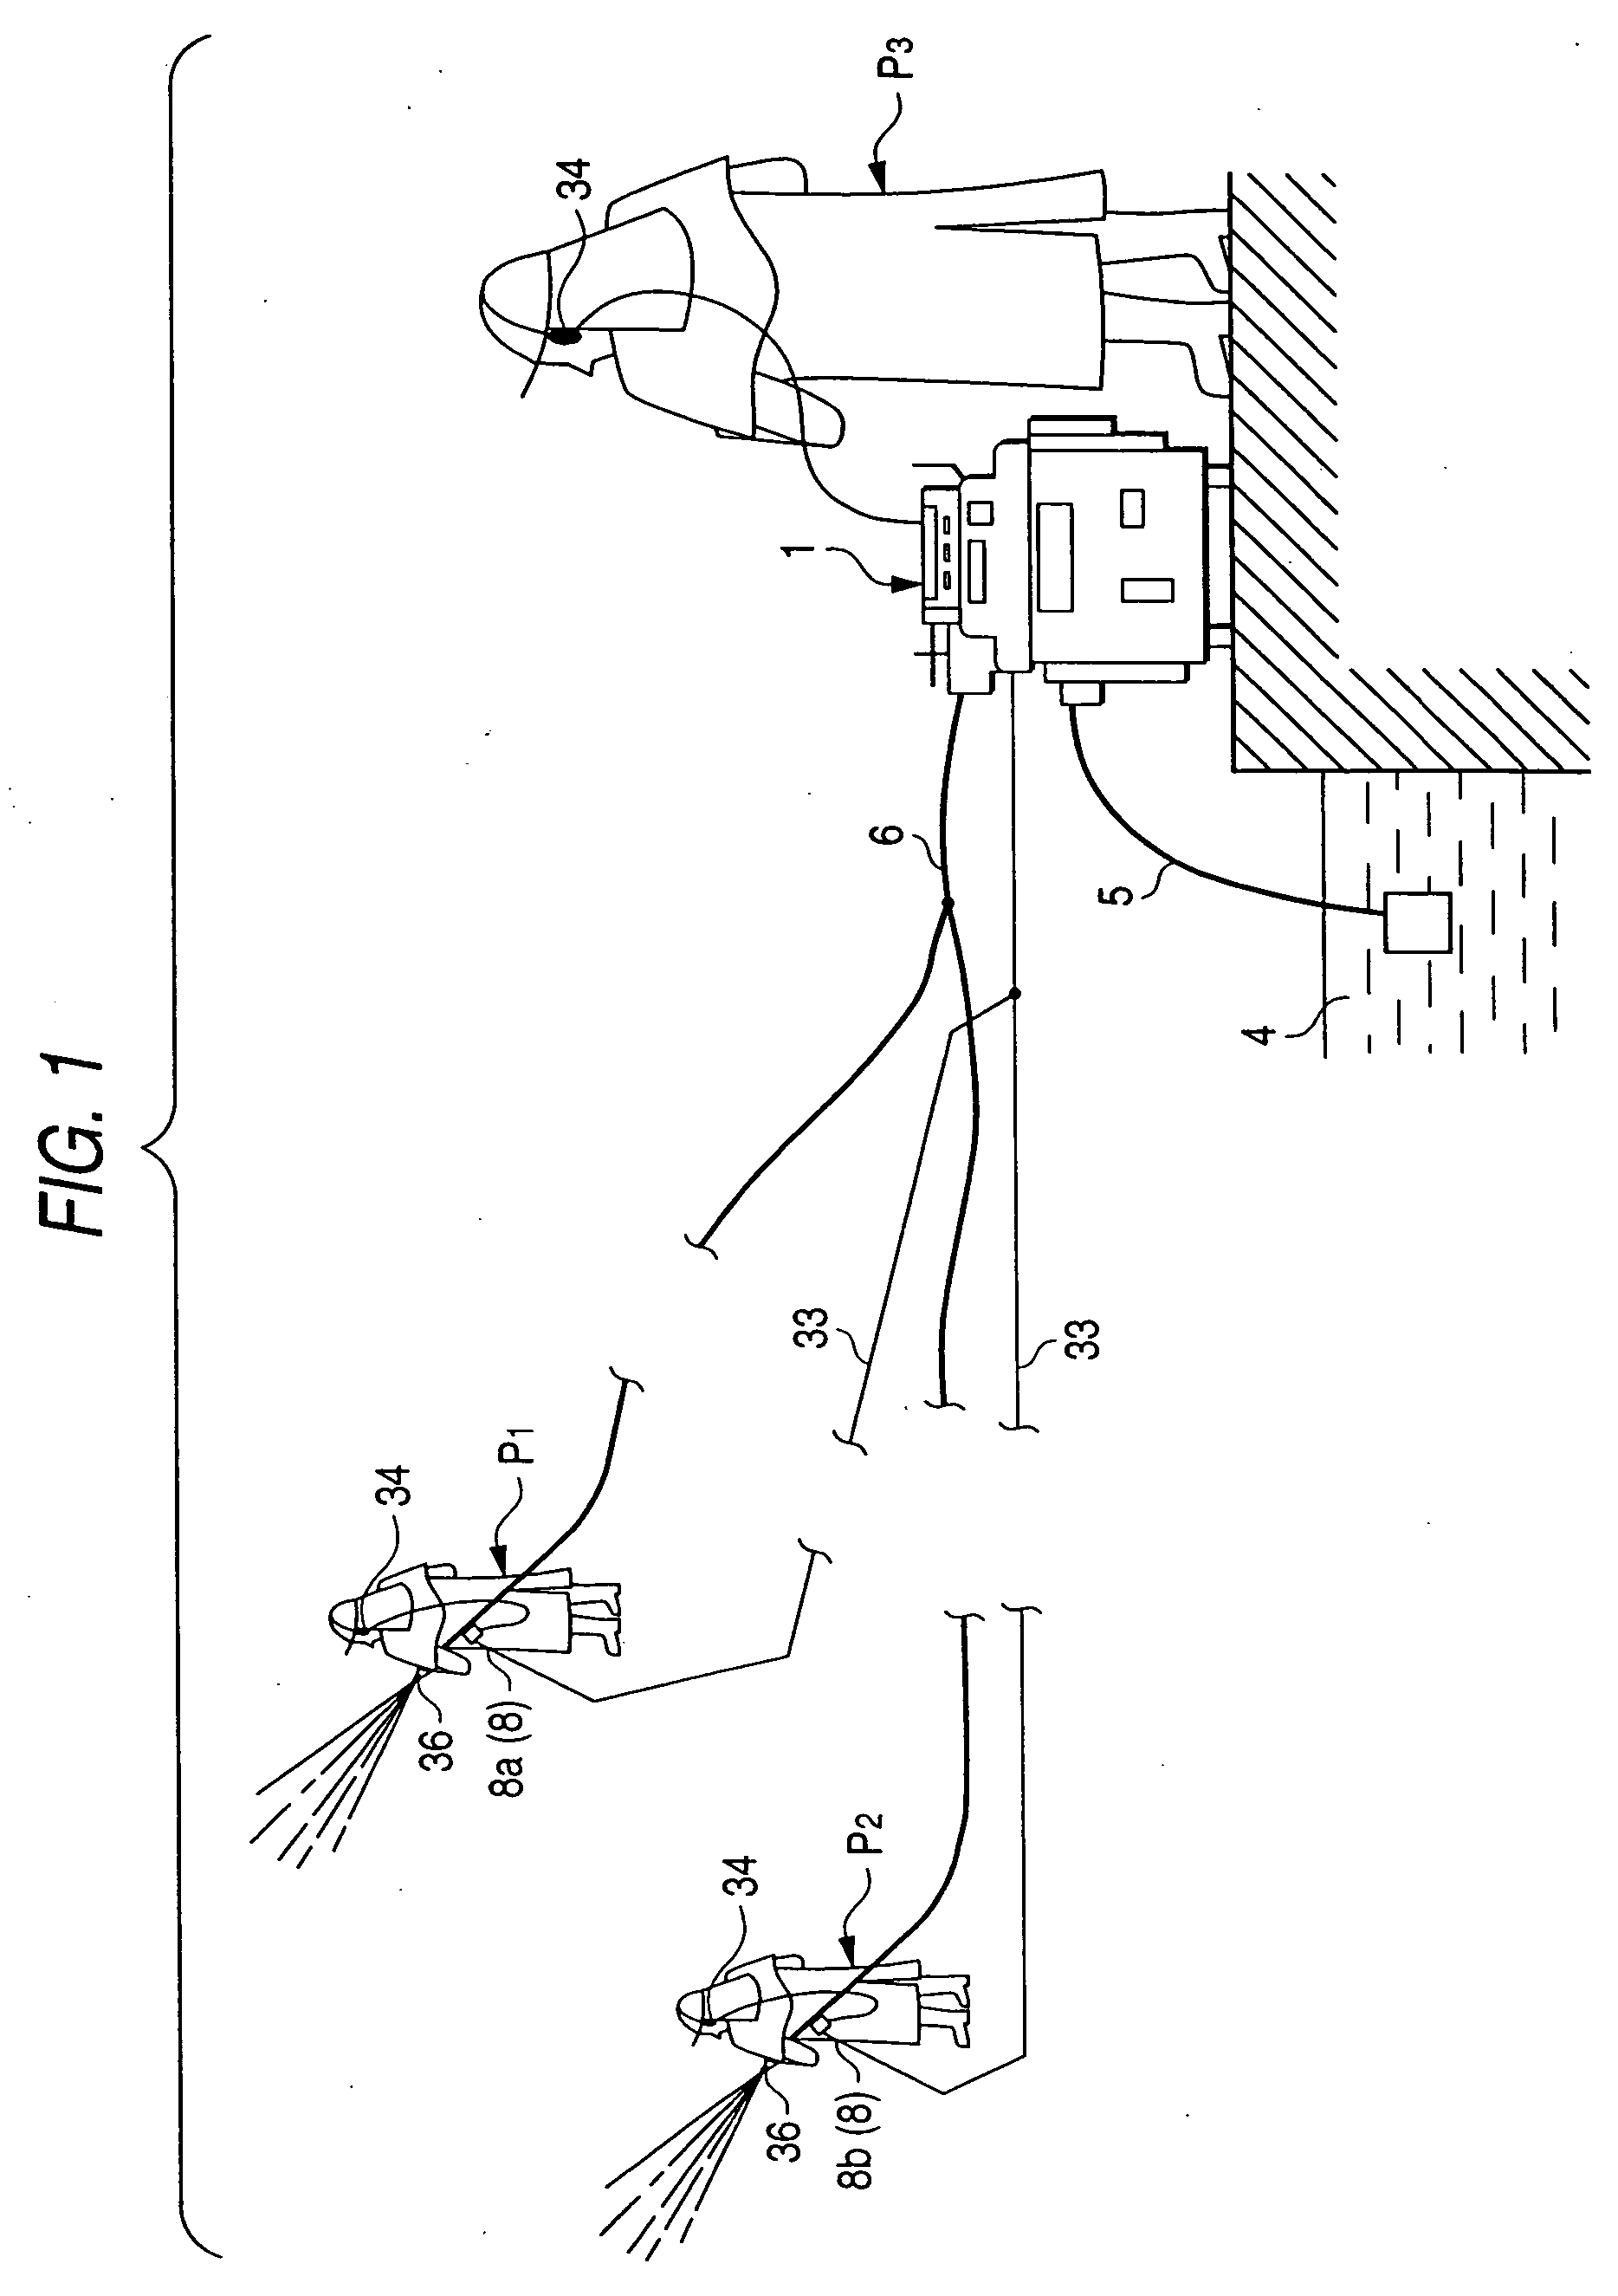 Control apparatus for a fire pump, operation display apparatus for a fire pump and operation mode control apparatus for a fire pump